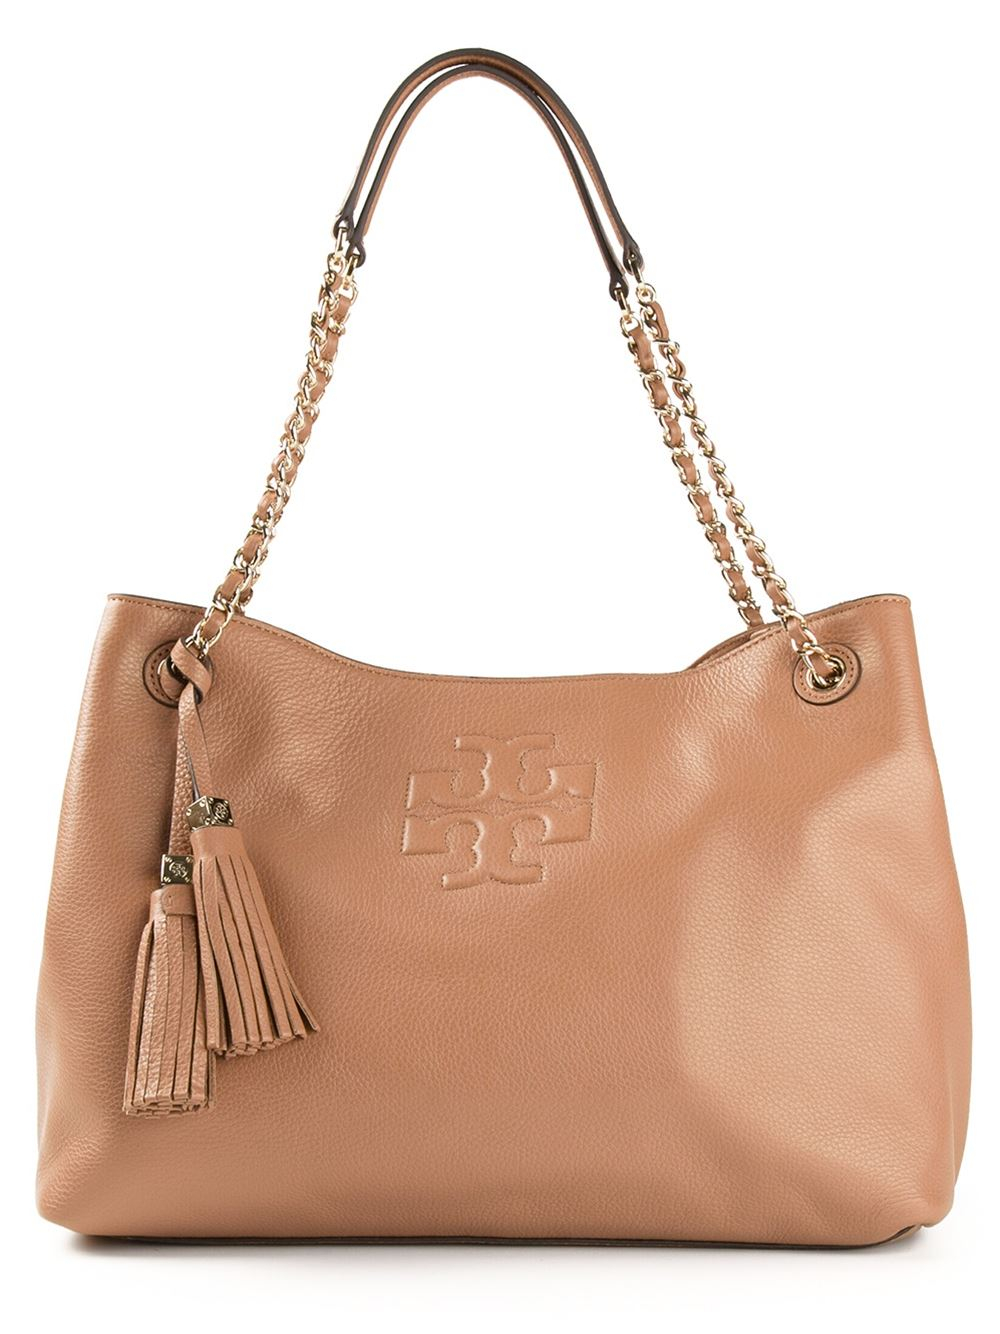 Lyst - Tory Burch Thea Chain Strap Tote in Brown